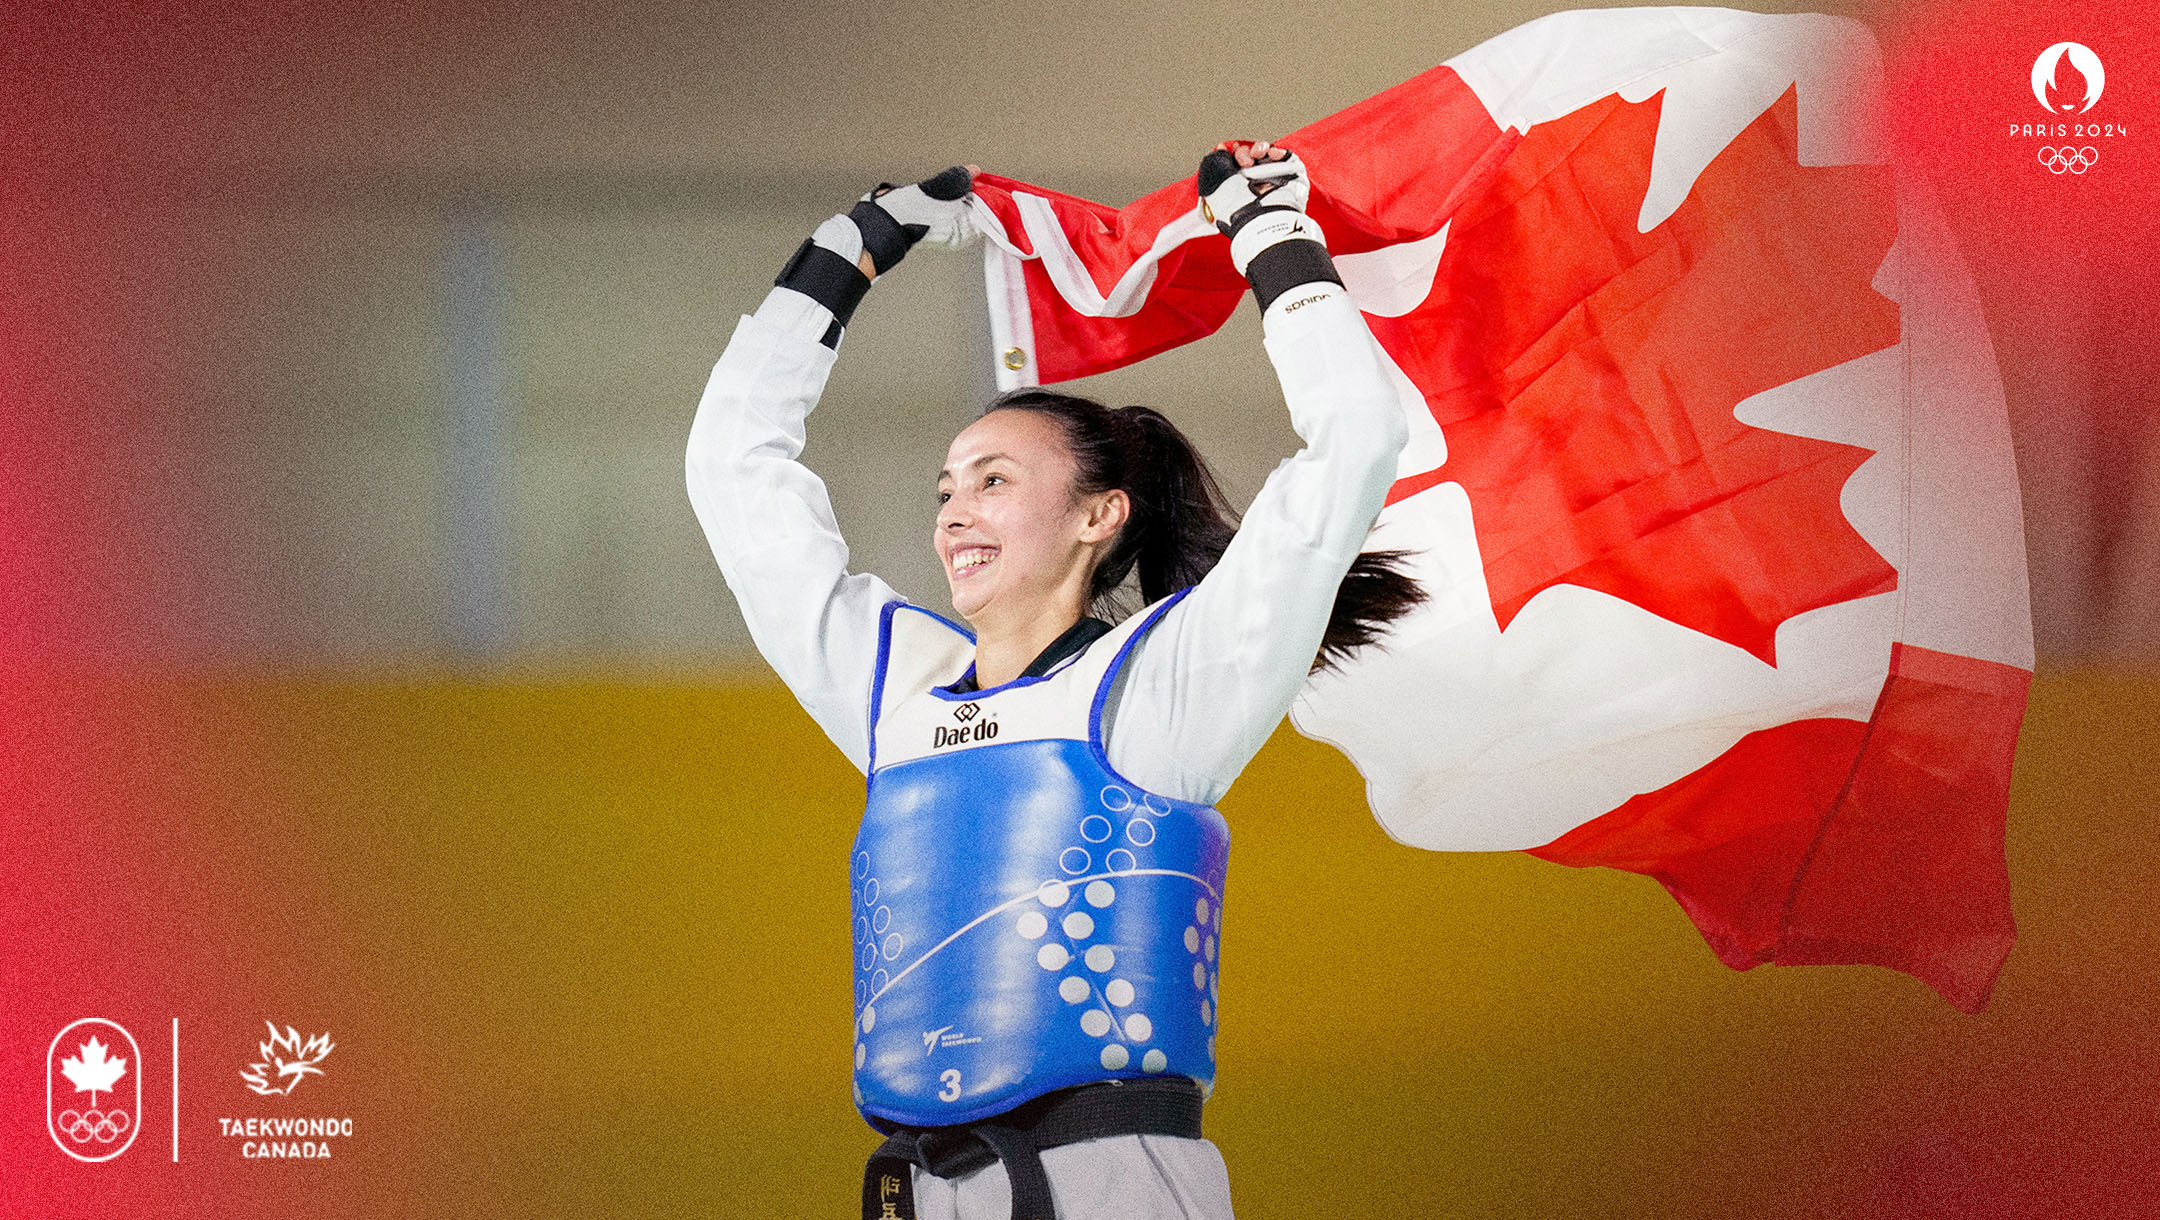 First team members of taekwondo athletes named to Canadian Olympic team Paris 2024 – Team Canada